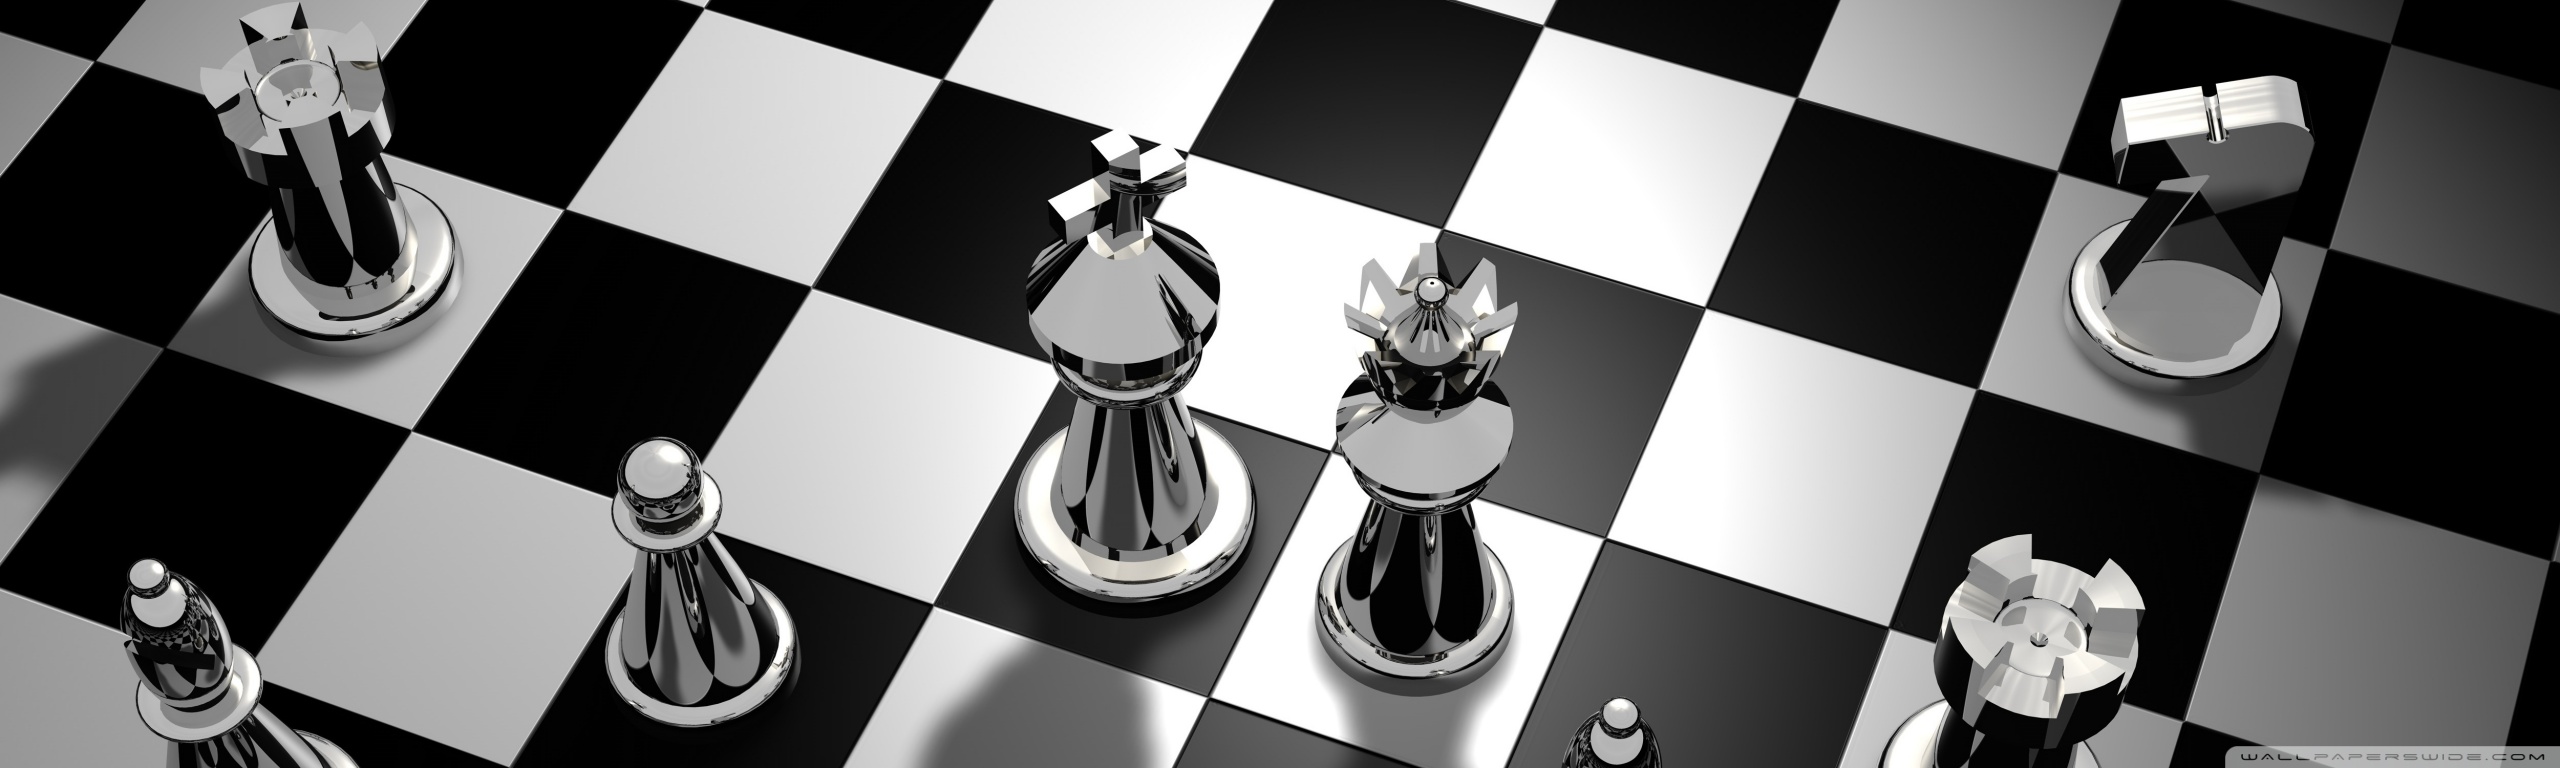 Download wallpaper 3840x2400 chess, pieces, game, games, party 4k ultra hd  16:10 hd background